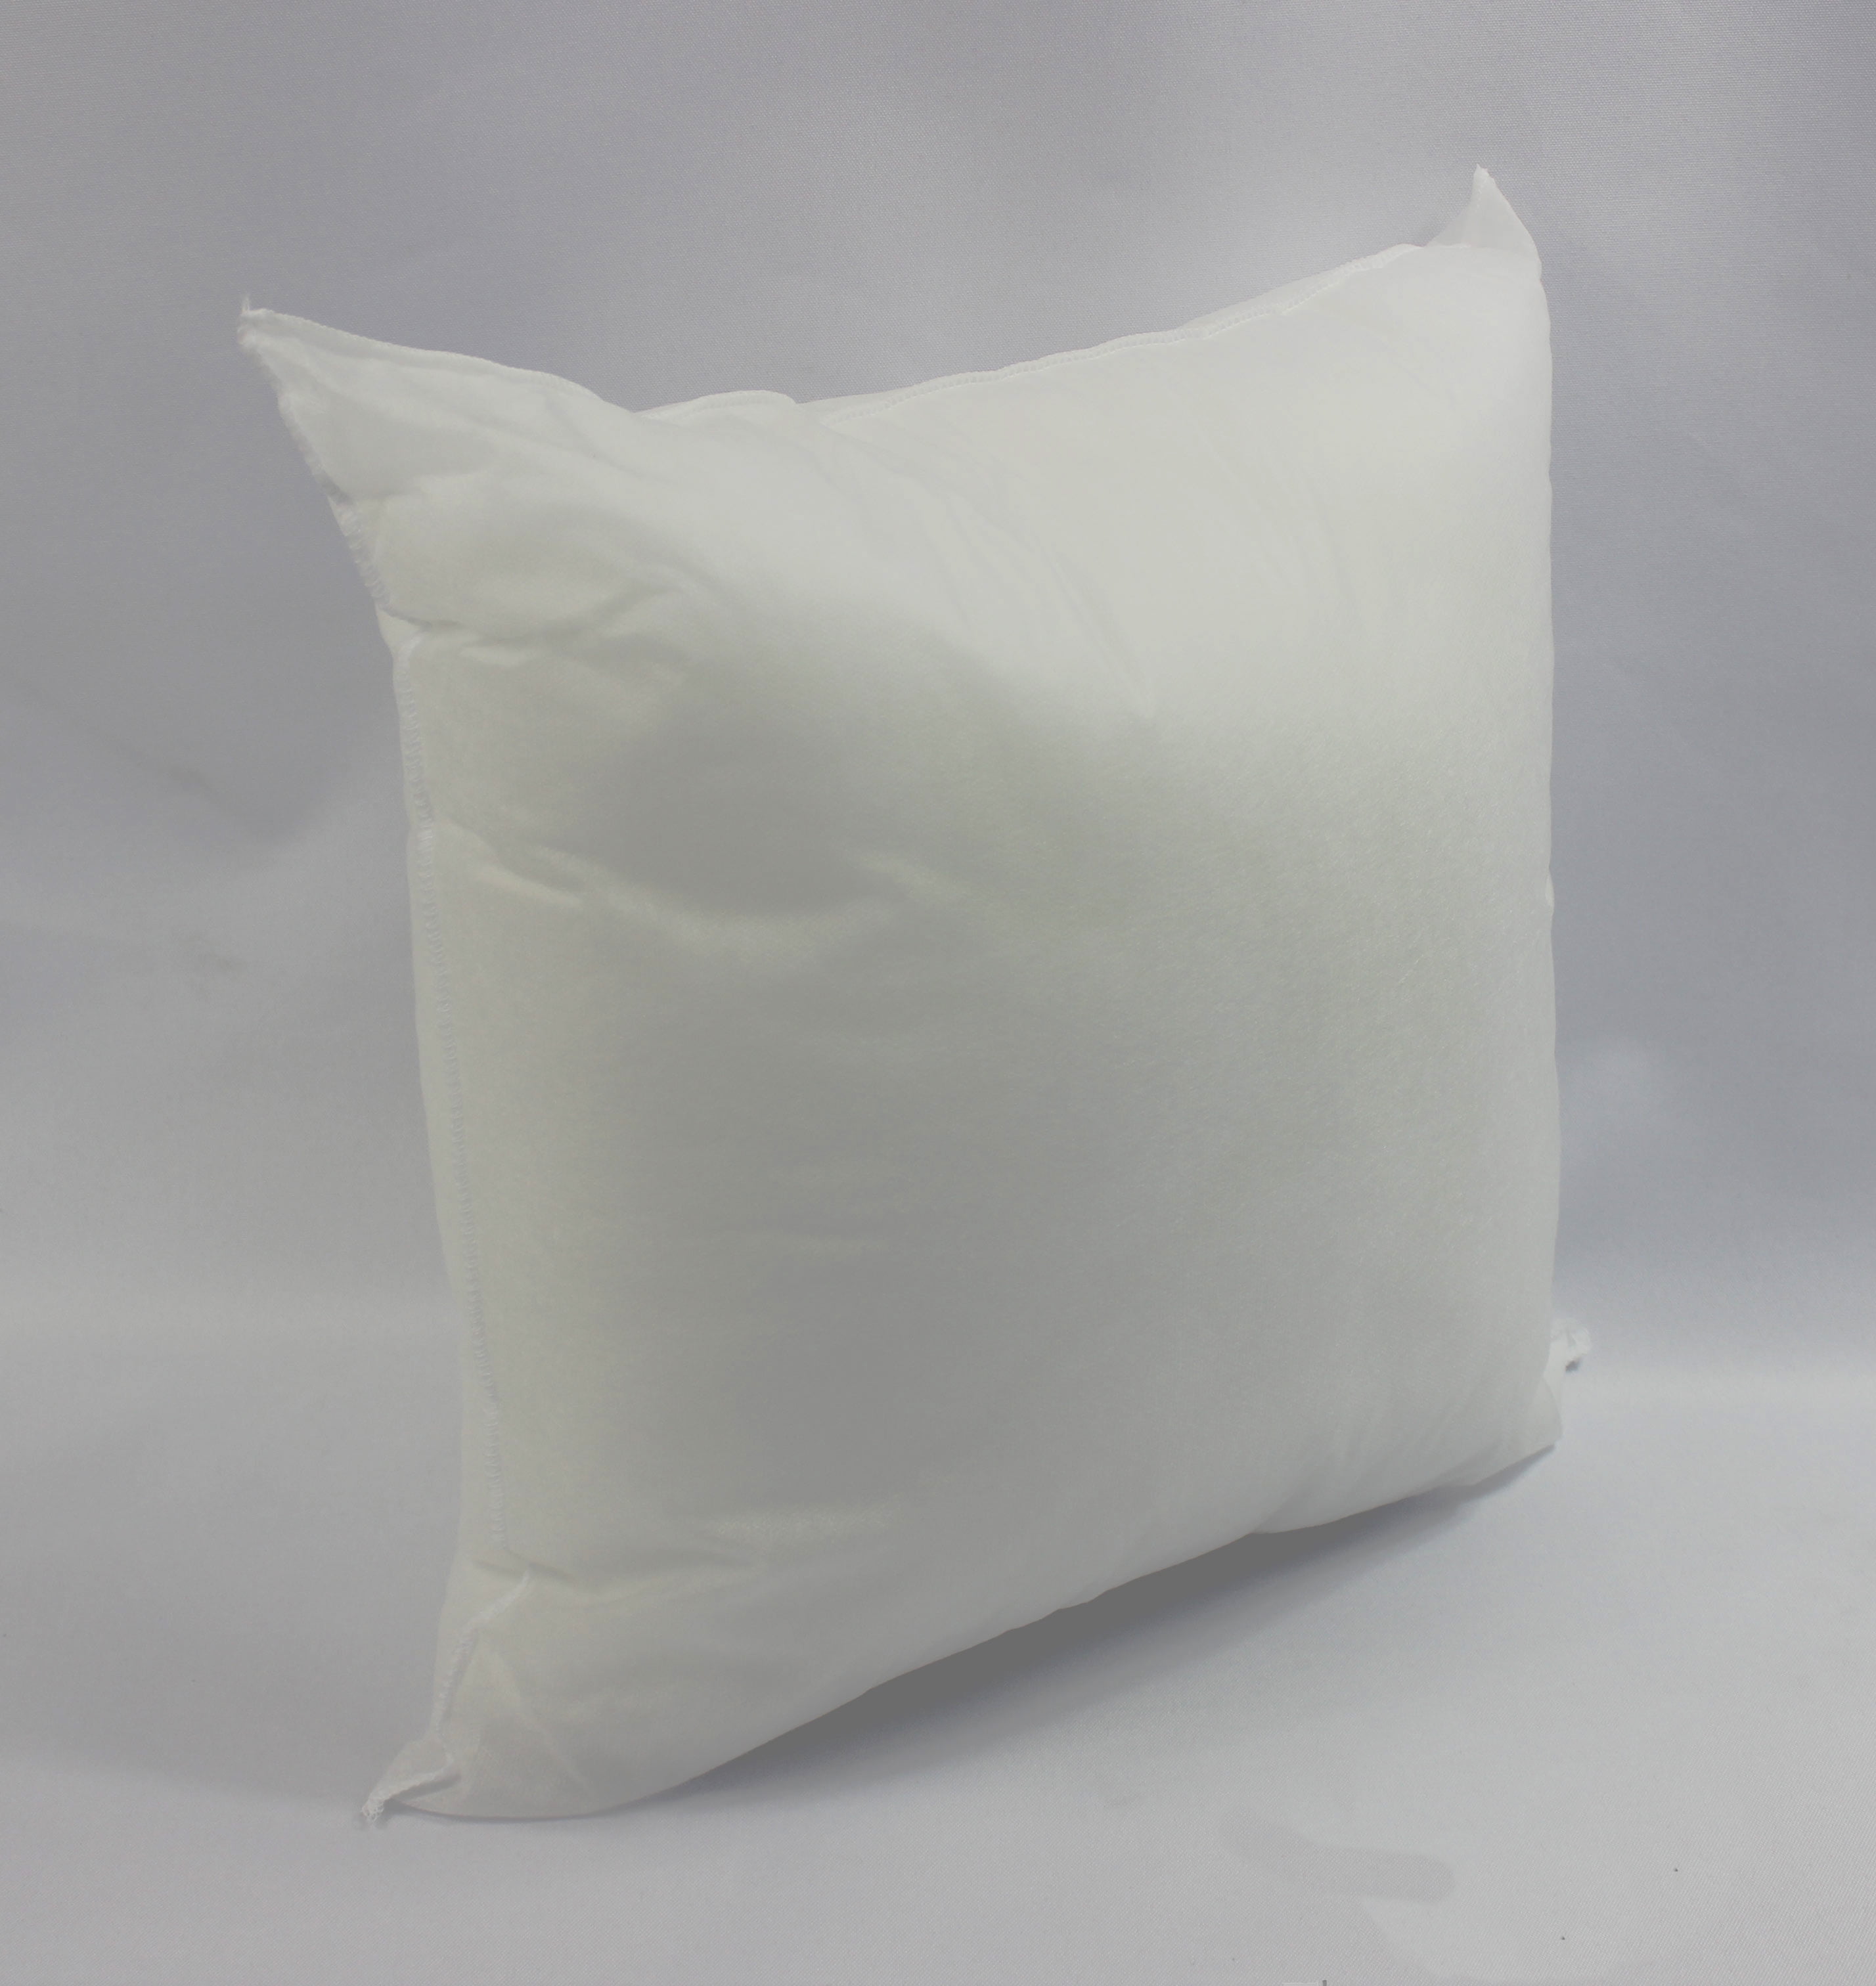 Mybecca Square Euro Pillow Form Insert ALL SIZES Made In USA Pillow Forms Insert 